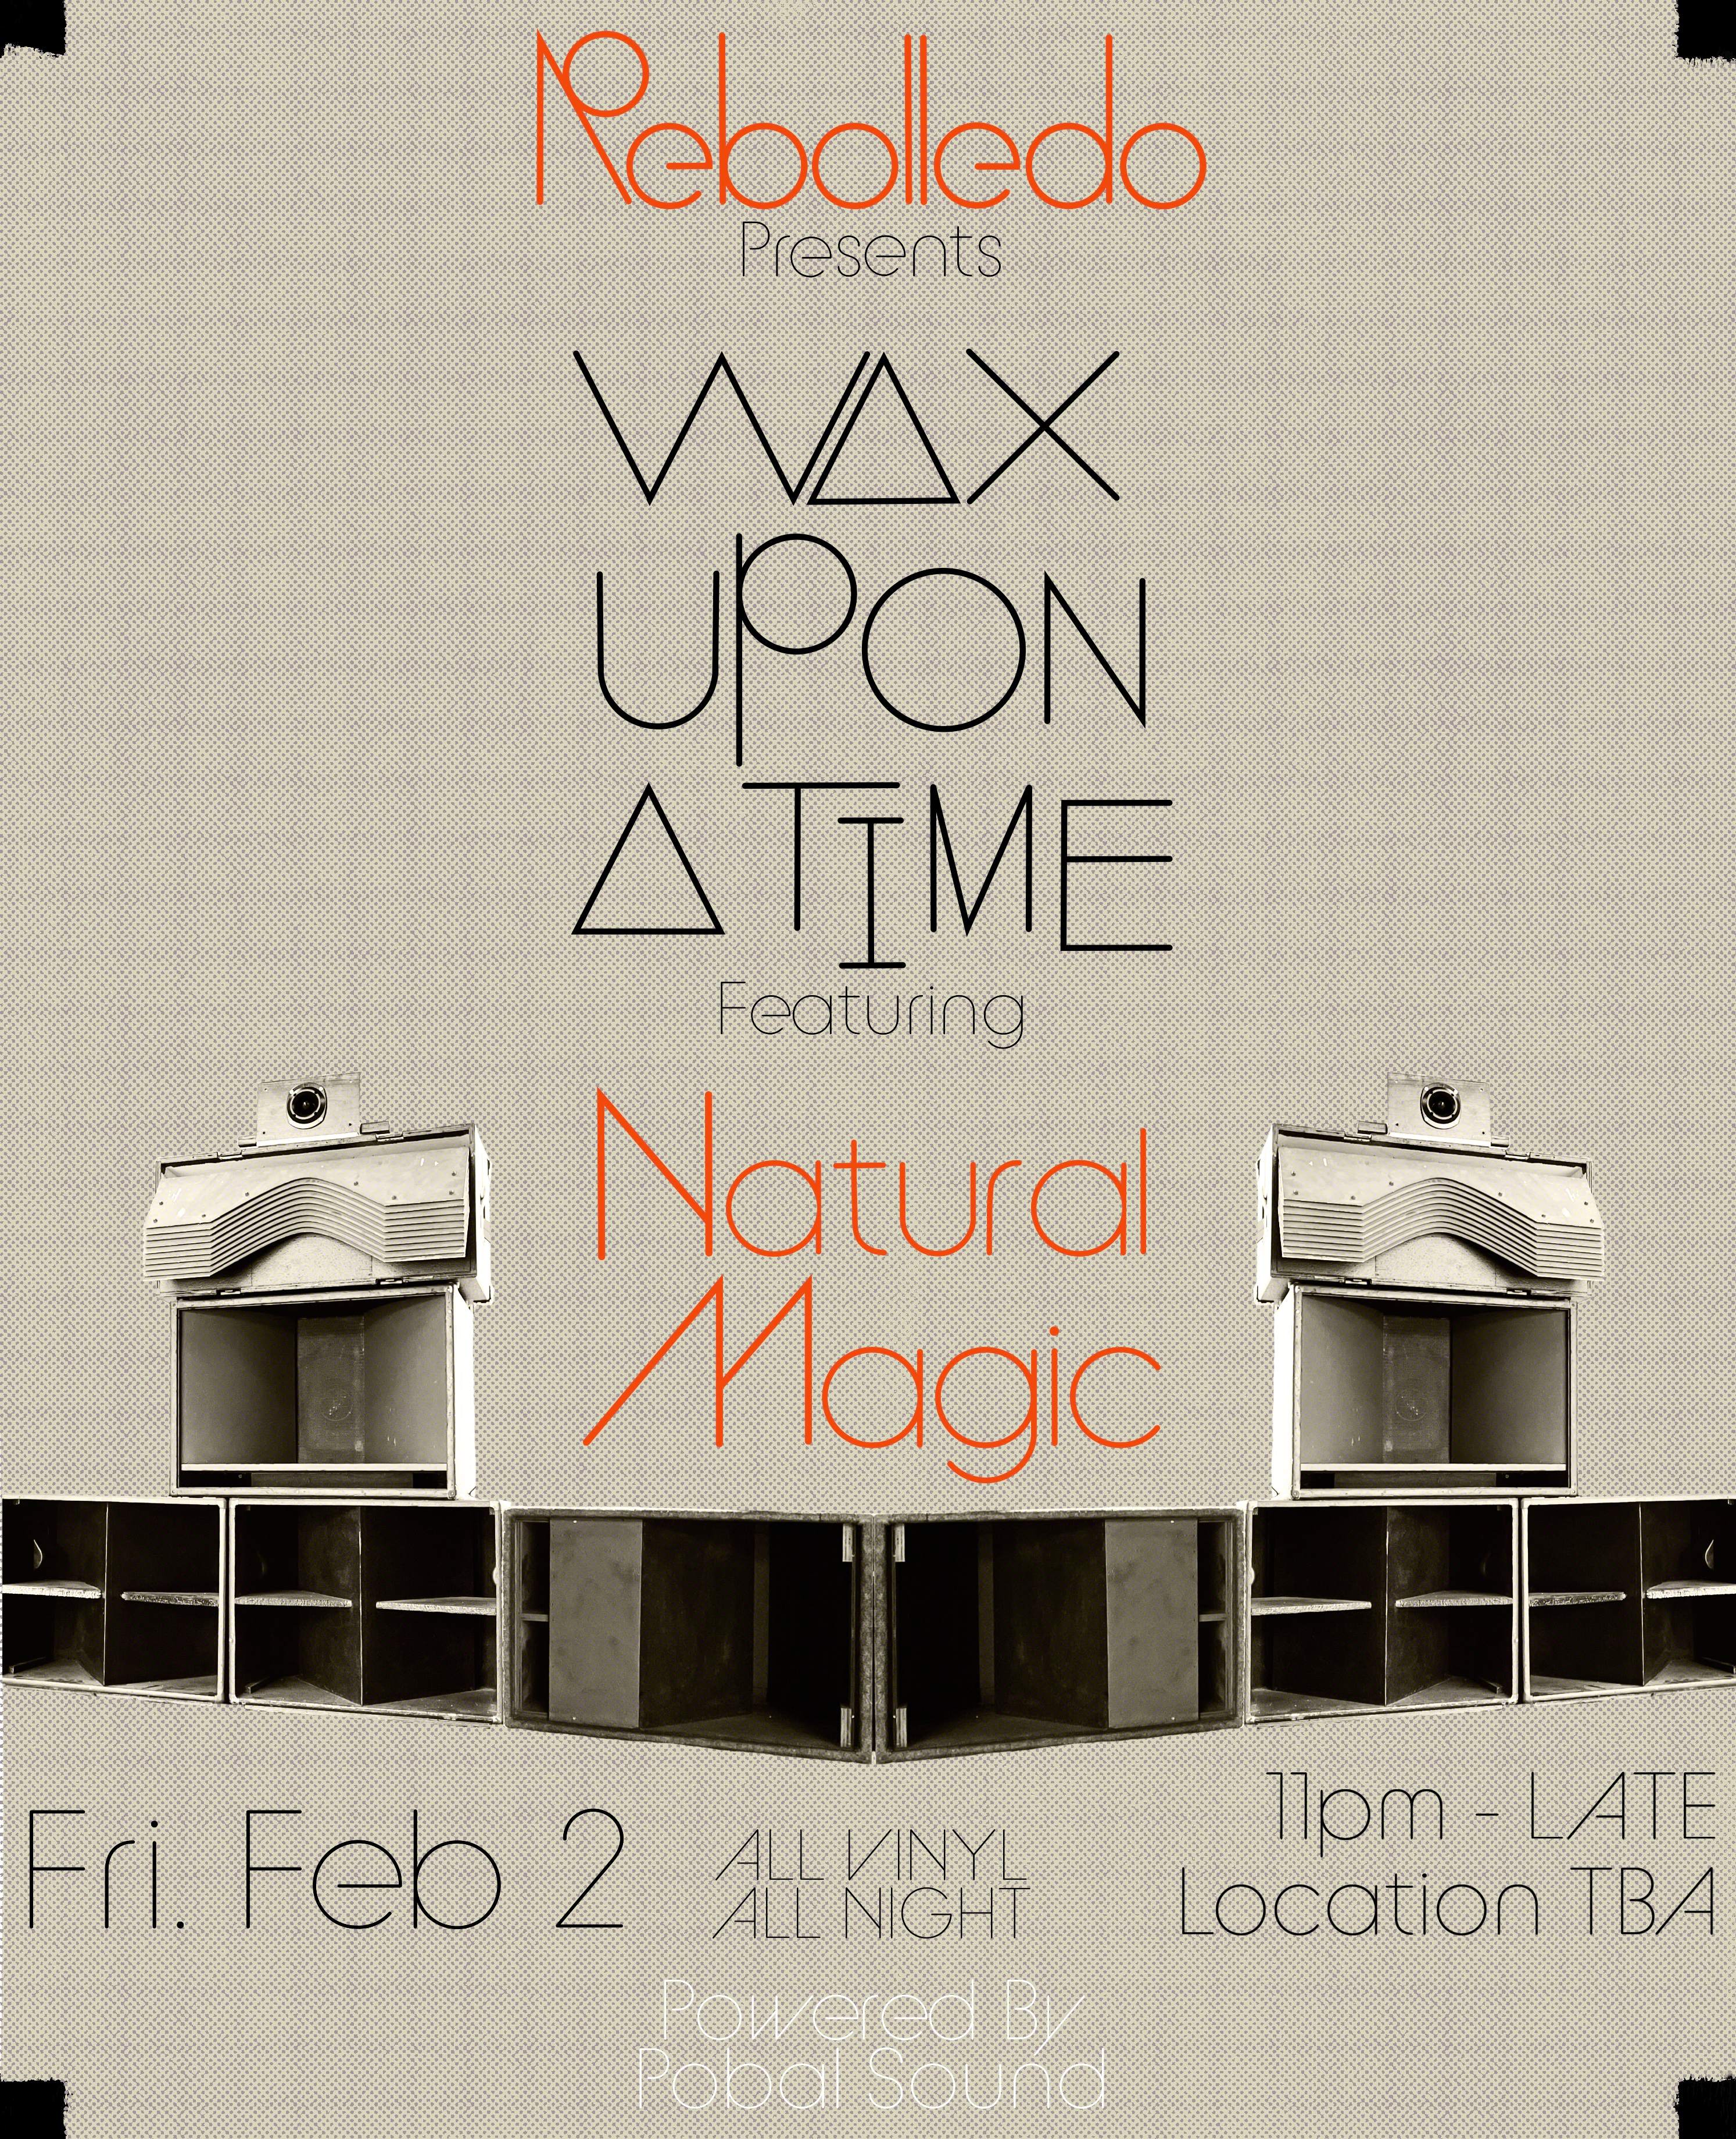 Wax Upon A Time feat. Rebolledo & Natural Magic (ALL NIGHT) - Powered by Pobal Sound - Página frontal